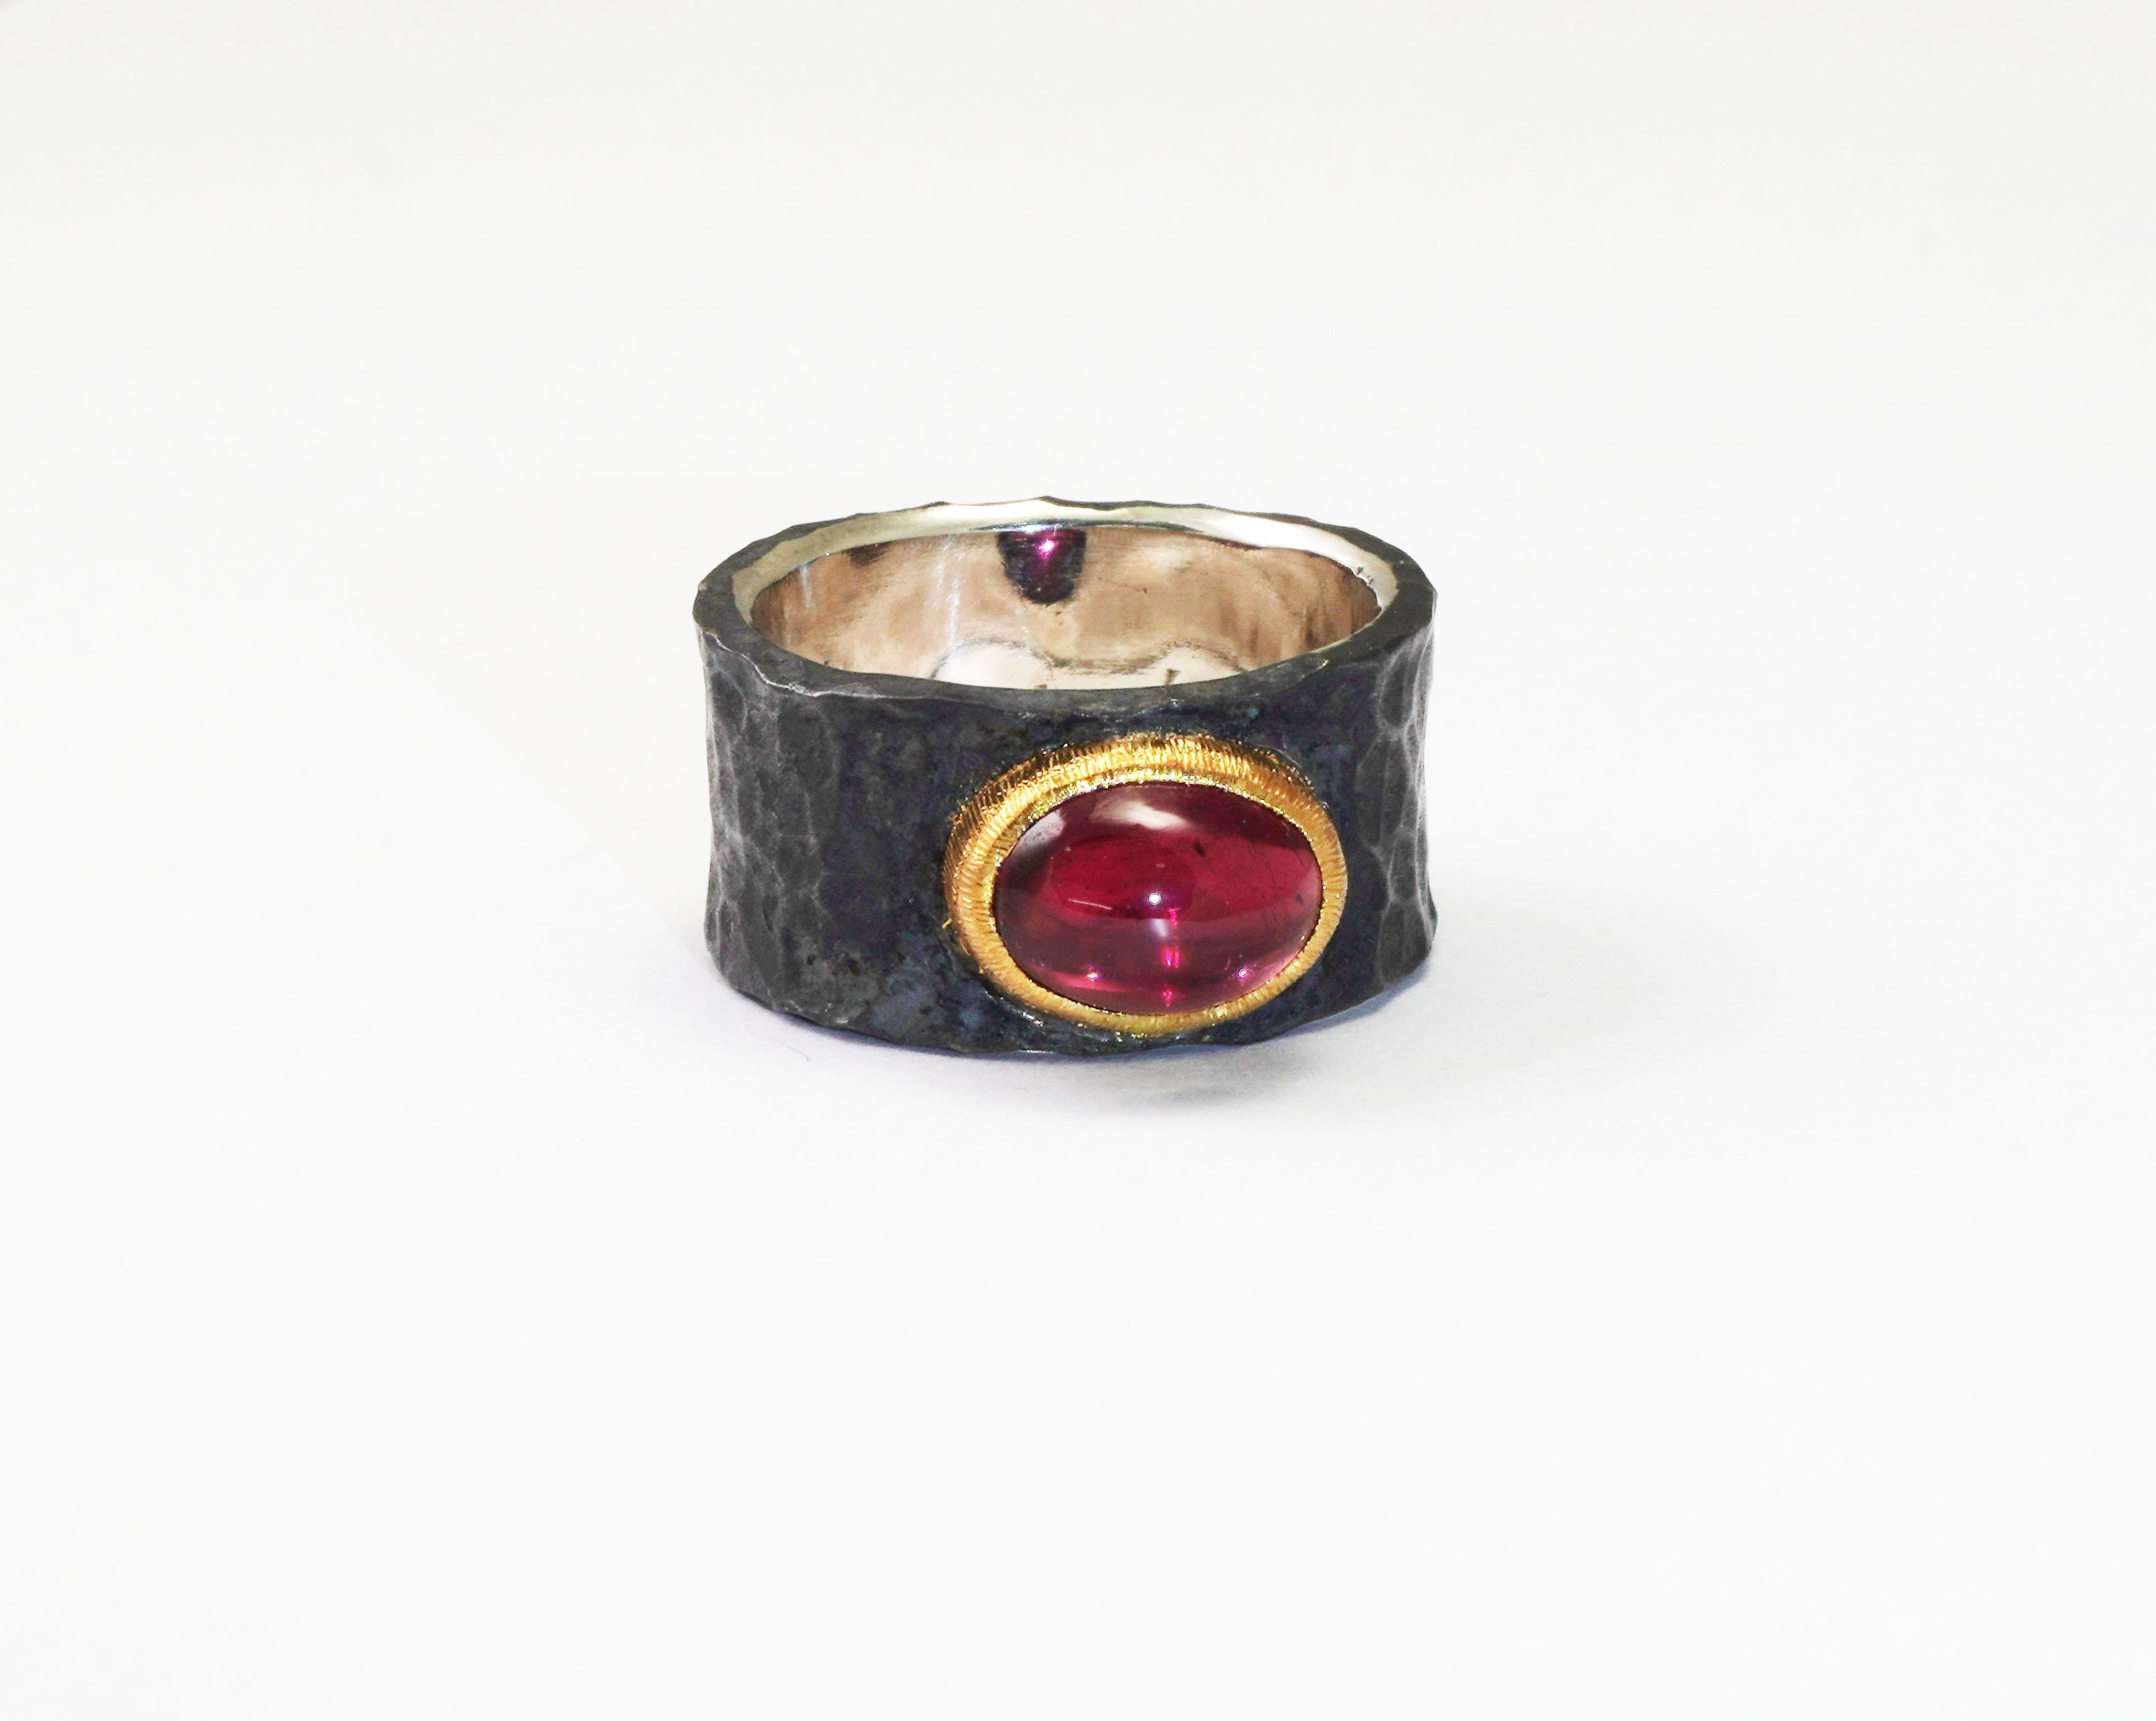 Handmade 925 Oxidized Silver Ring with Garnet
(SOLID GOLD)
Gold kt: 22 
Gold color: Yellow
Ring size: 6 1/2 US
Total weight: 9.80 grams

Set with:
- Garnet
Cut: Cabochon
Color: Crimson